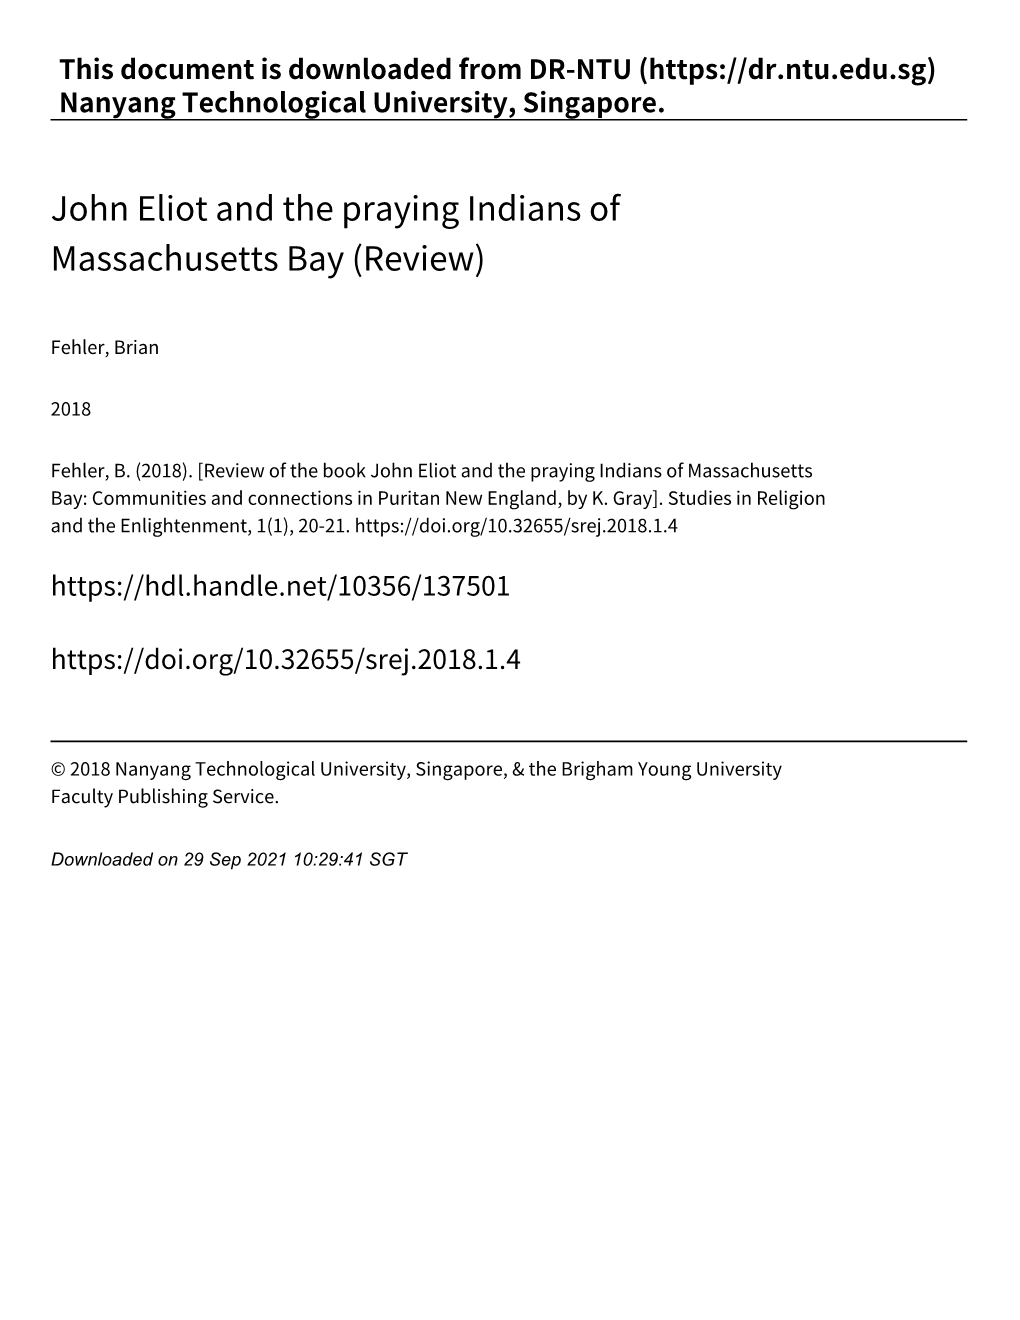 John Eliot and the Praying Indians of Massachusetts Bay (Review)